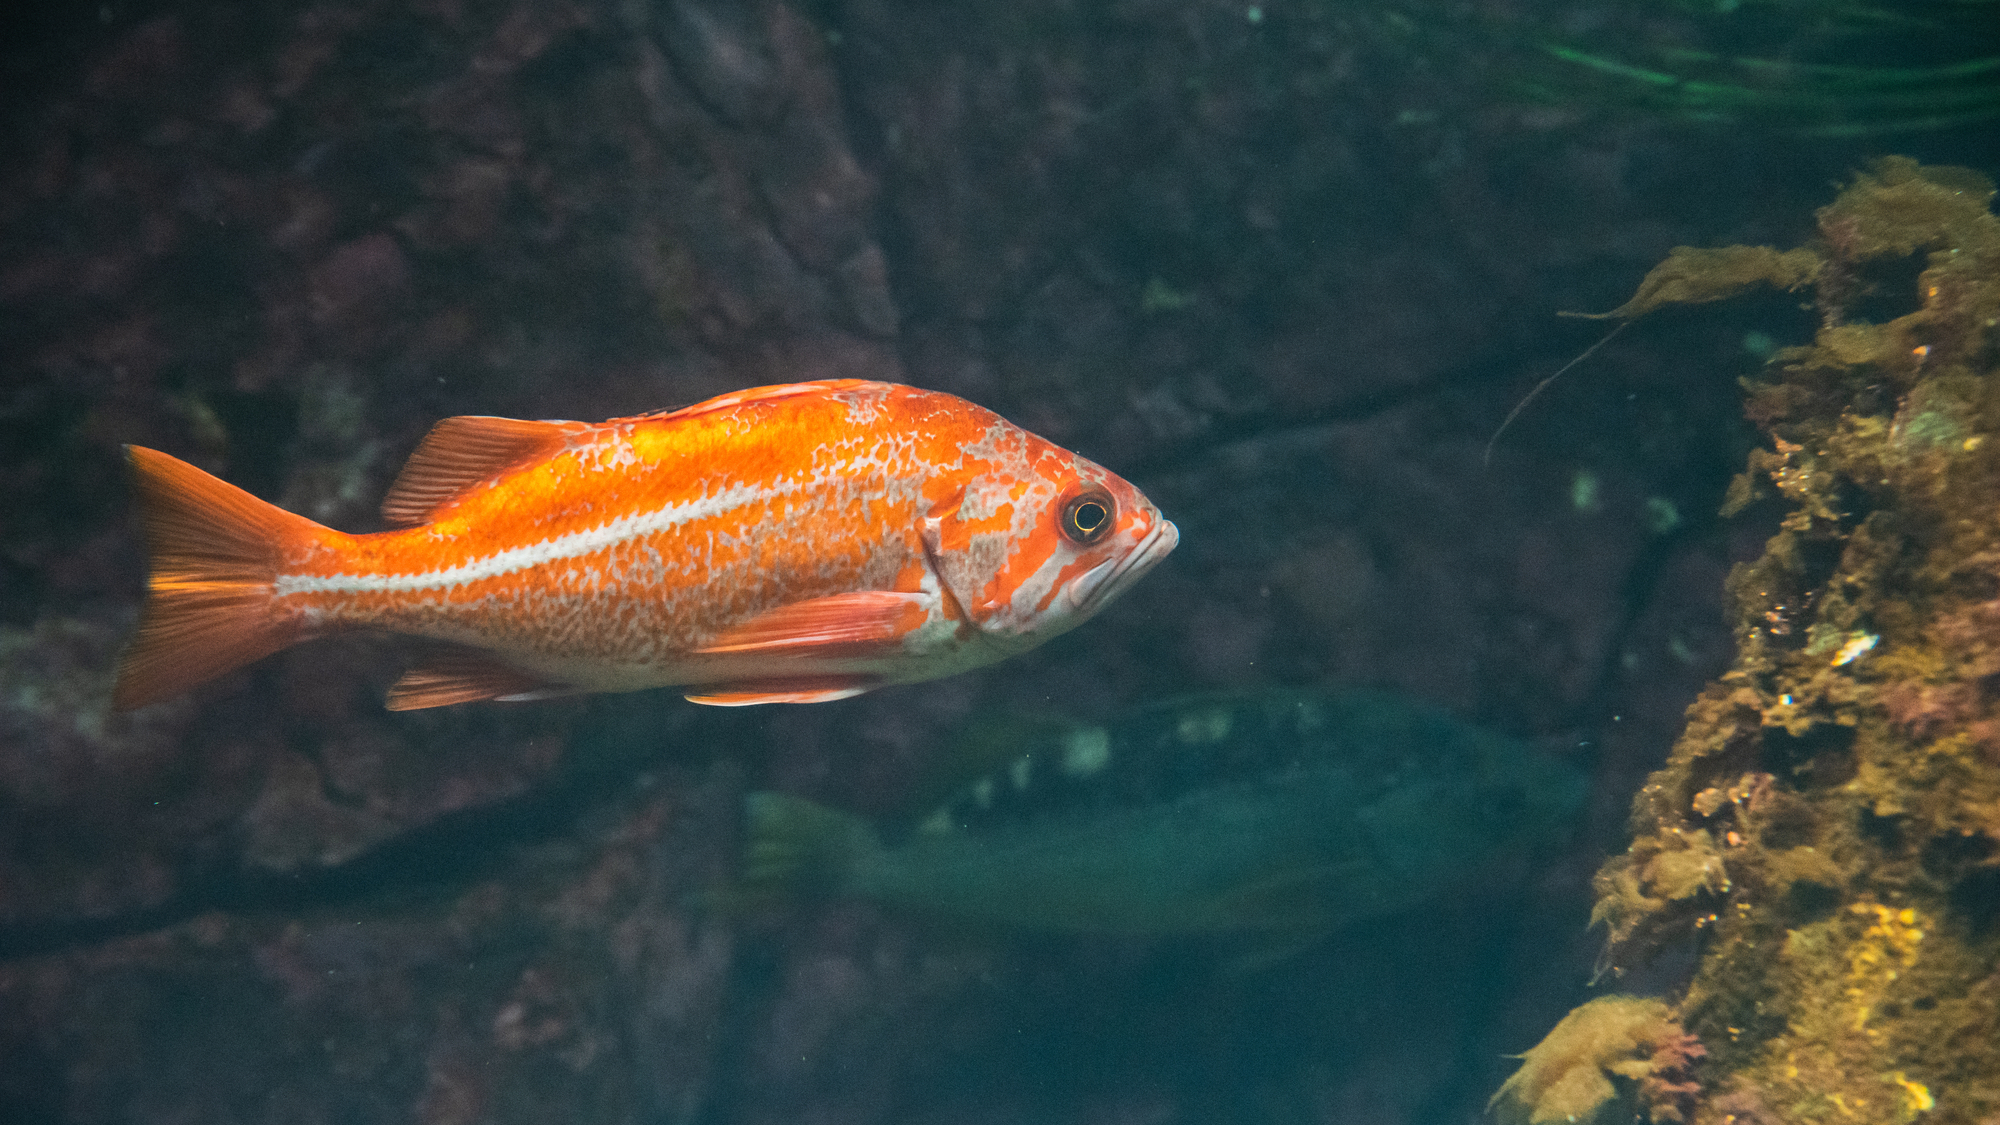 an orange spotted fish with a white line that stretches across its body